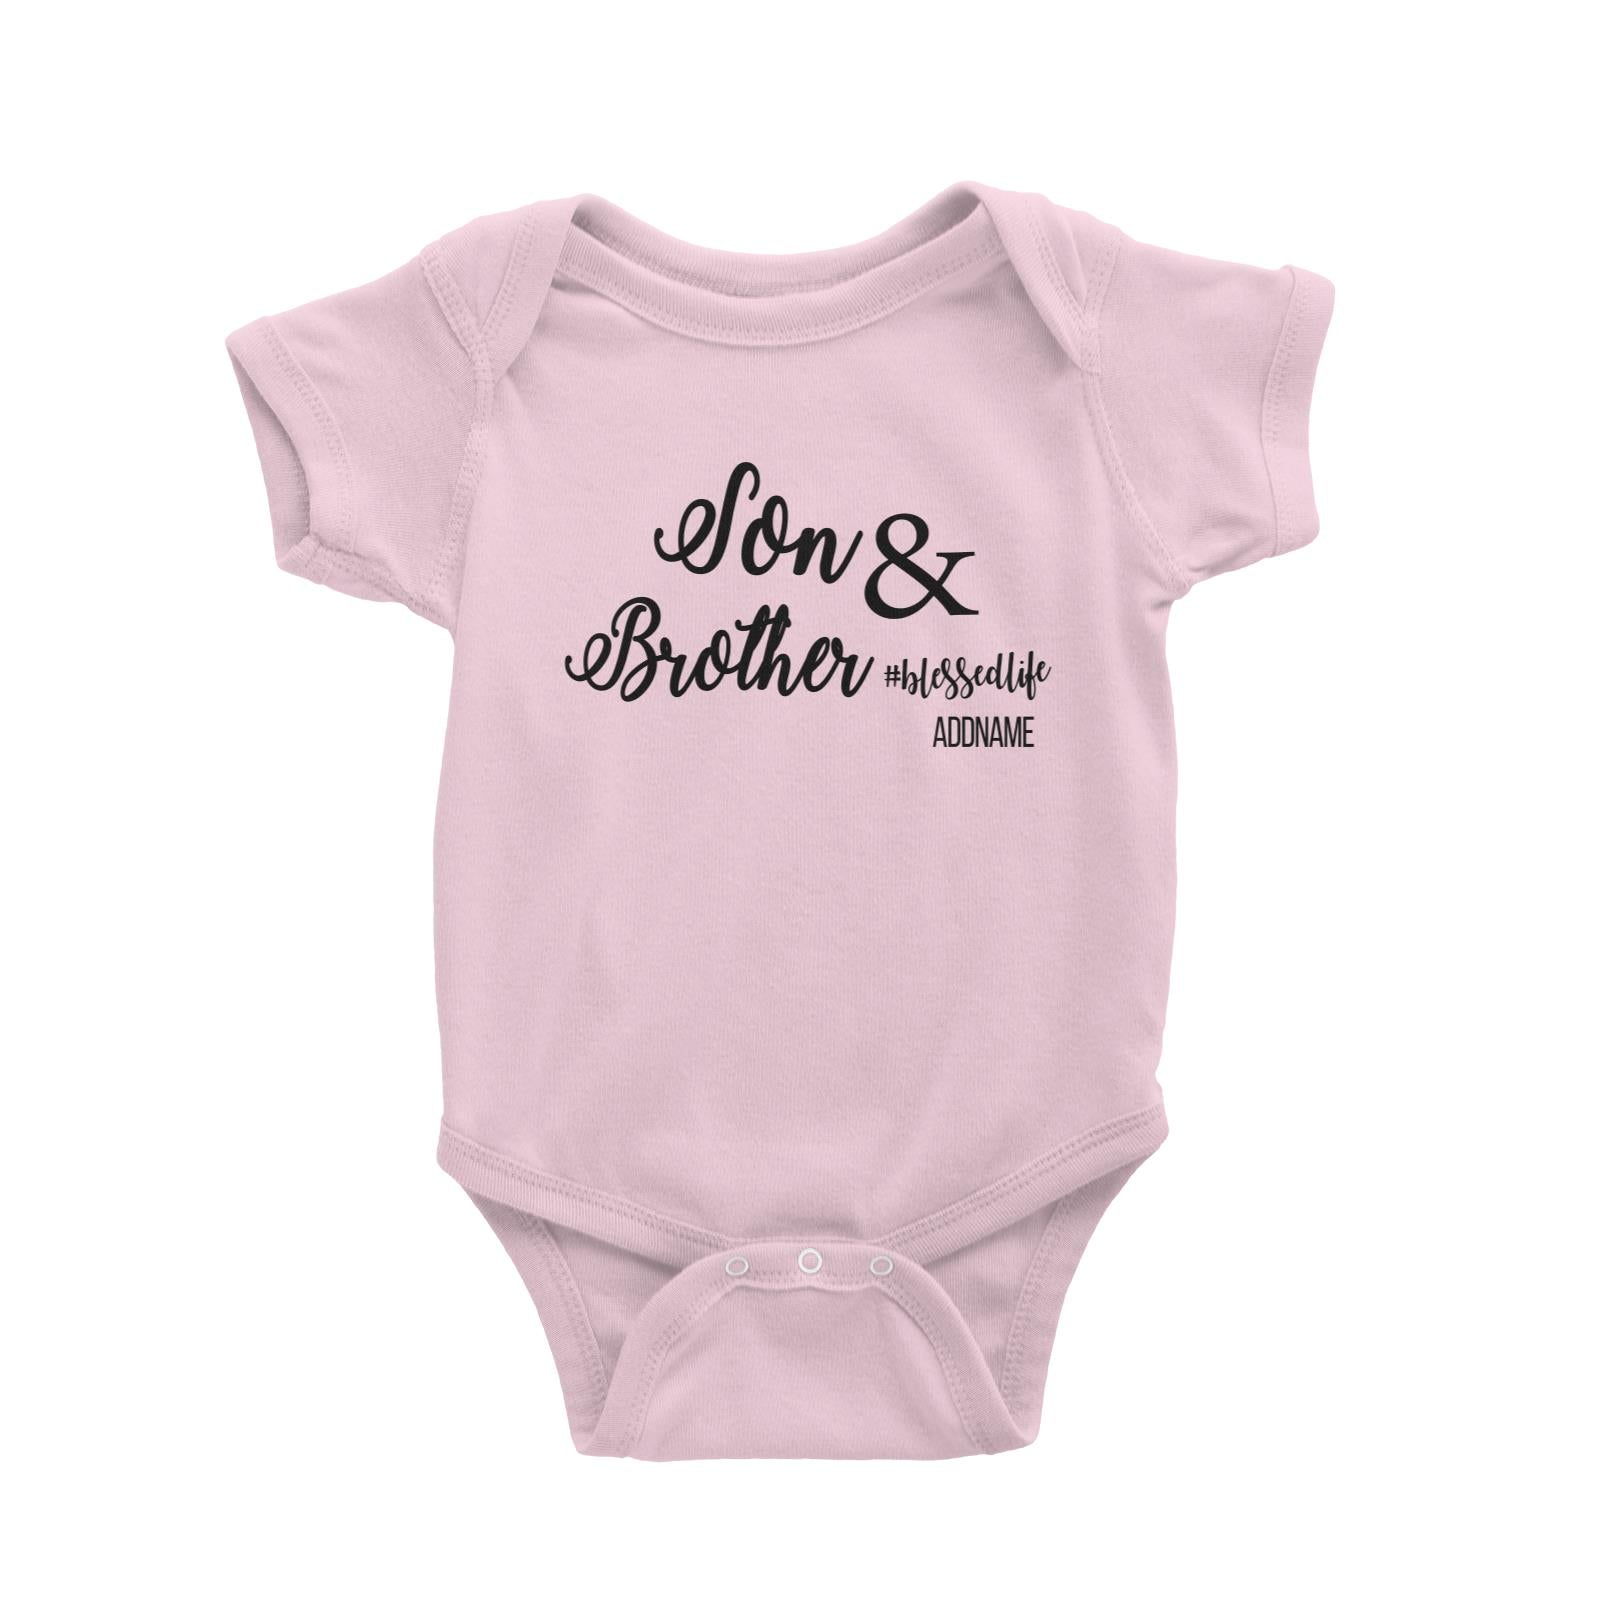 Son & Brother Baby Romper